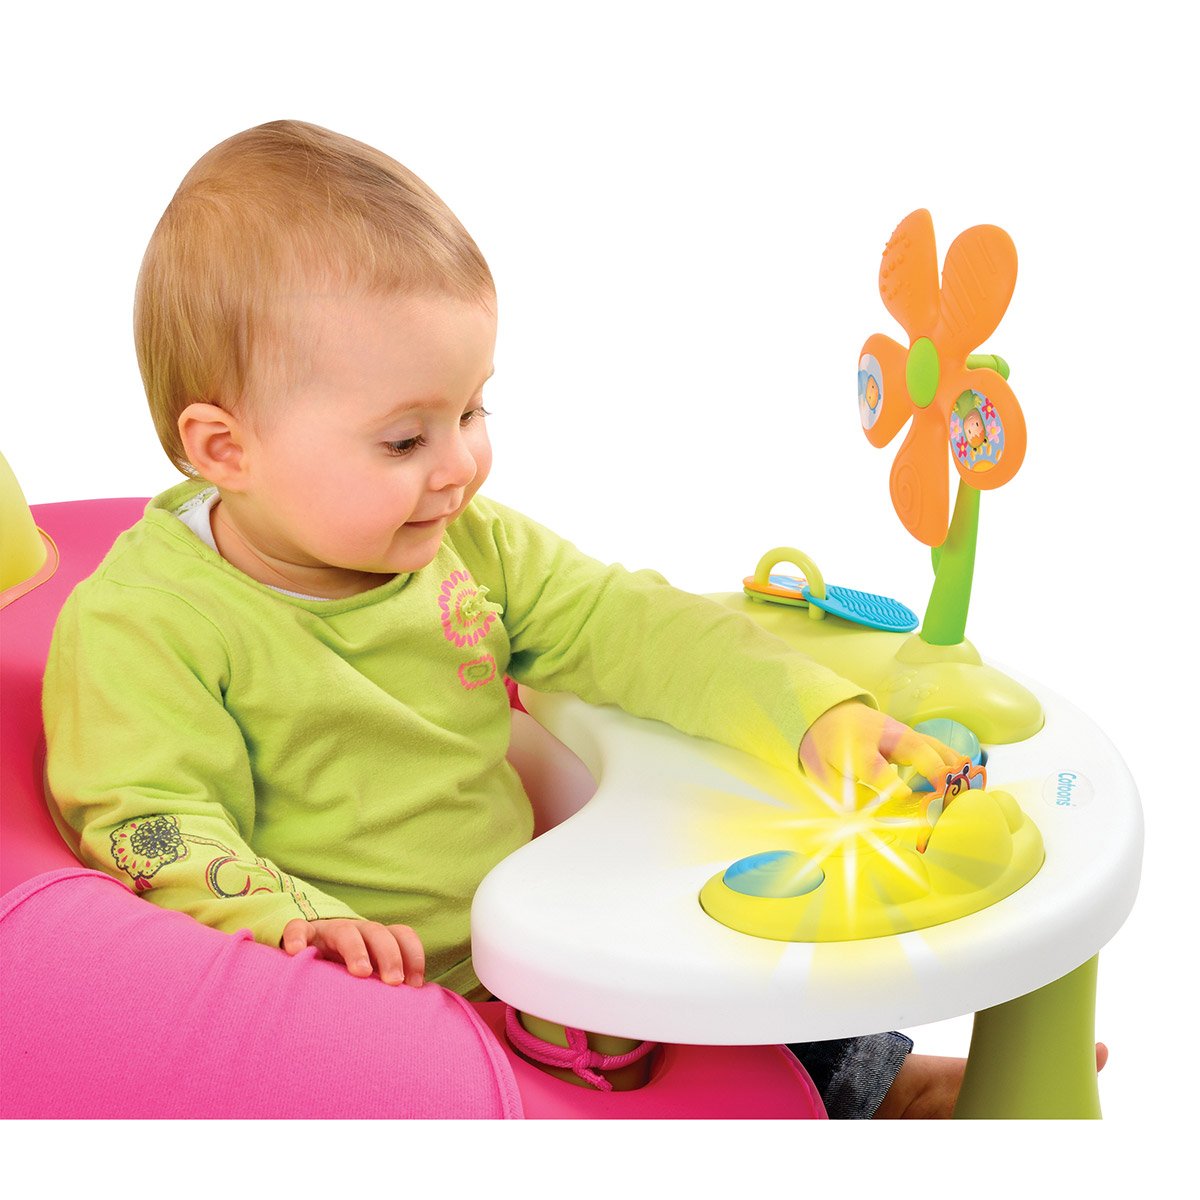 cosy seat cotoons toys r us